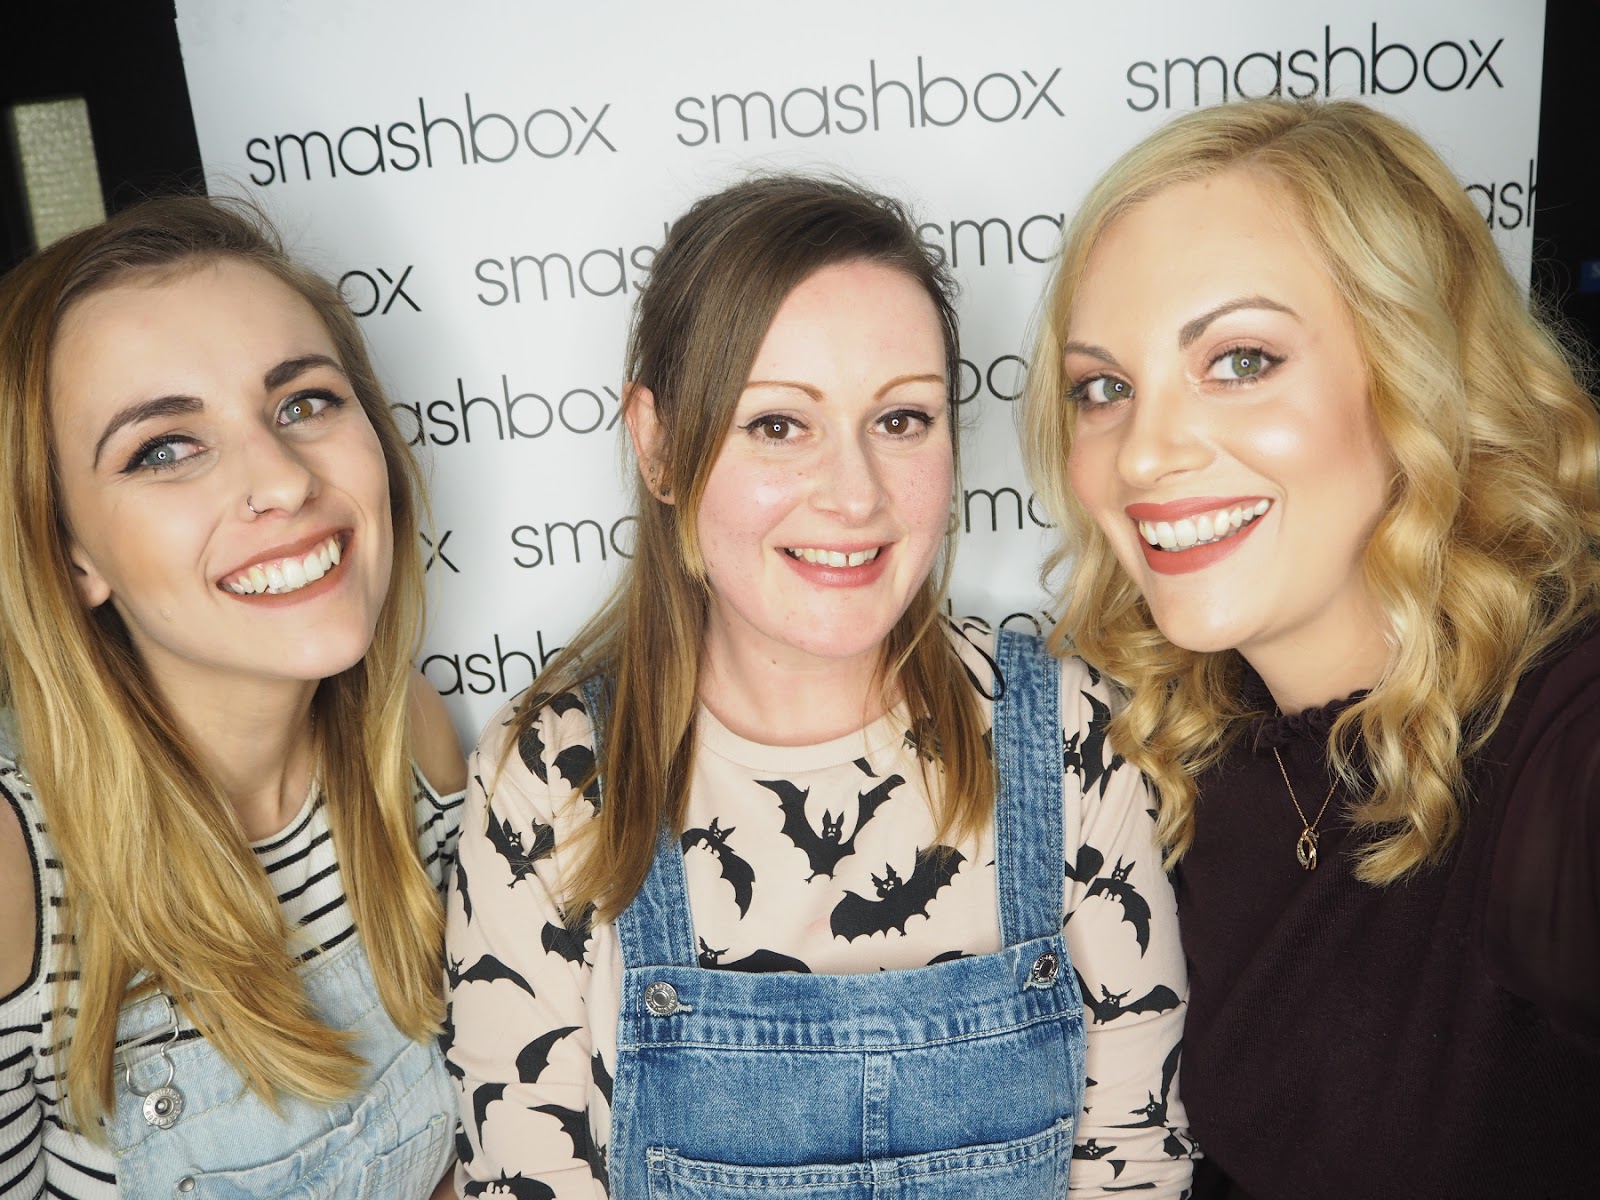 Smashbox Cosmetics Event in Brighton, Katie Kirk Loves, UK Blogger, Beauty Blogger Make Up Blogger, Brighton Blogger, Sussex Blogger, Smashbox Cosmetics, Bumble and Bumble, Glam Glow, Blogging Event, Make Up Review, Smashbox Cosmetics Cover Shot Palettes, Ablaze Palette, Smashbox Spotlight Palette, Smashbox Lipstick